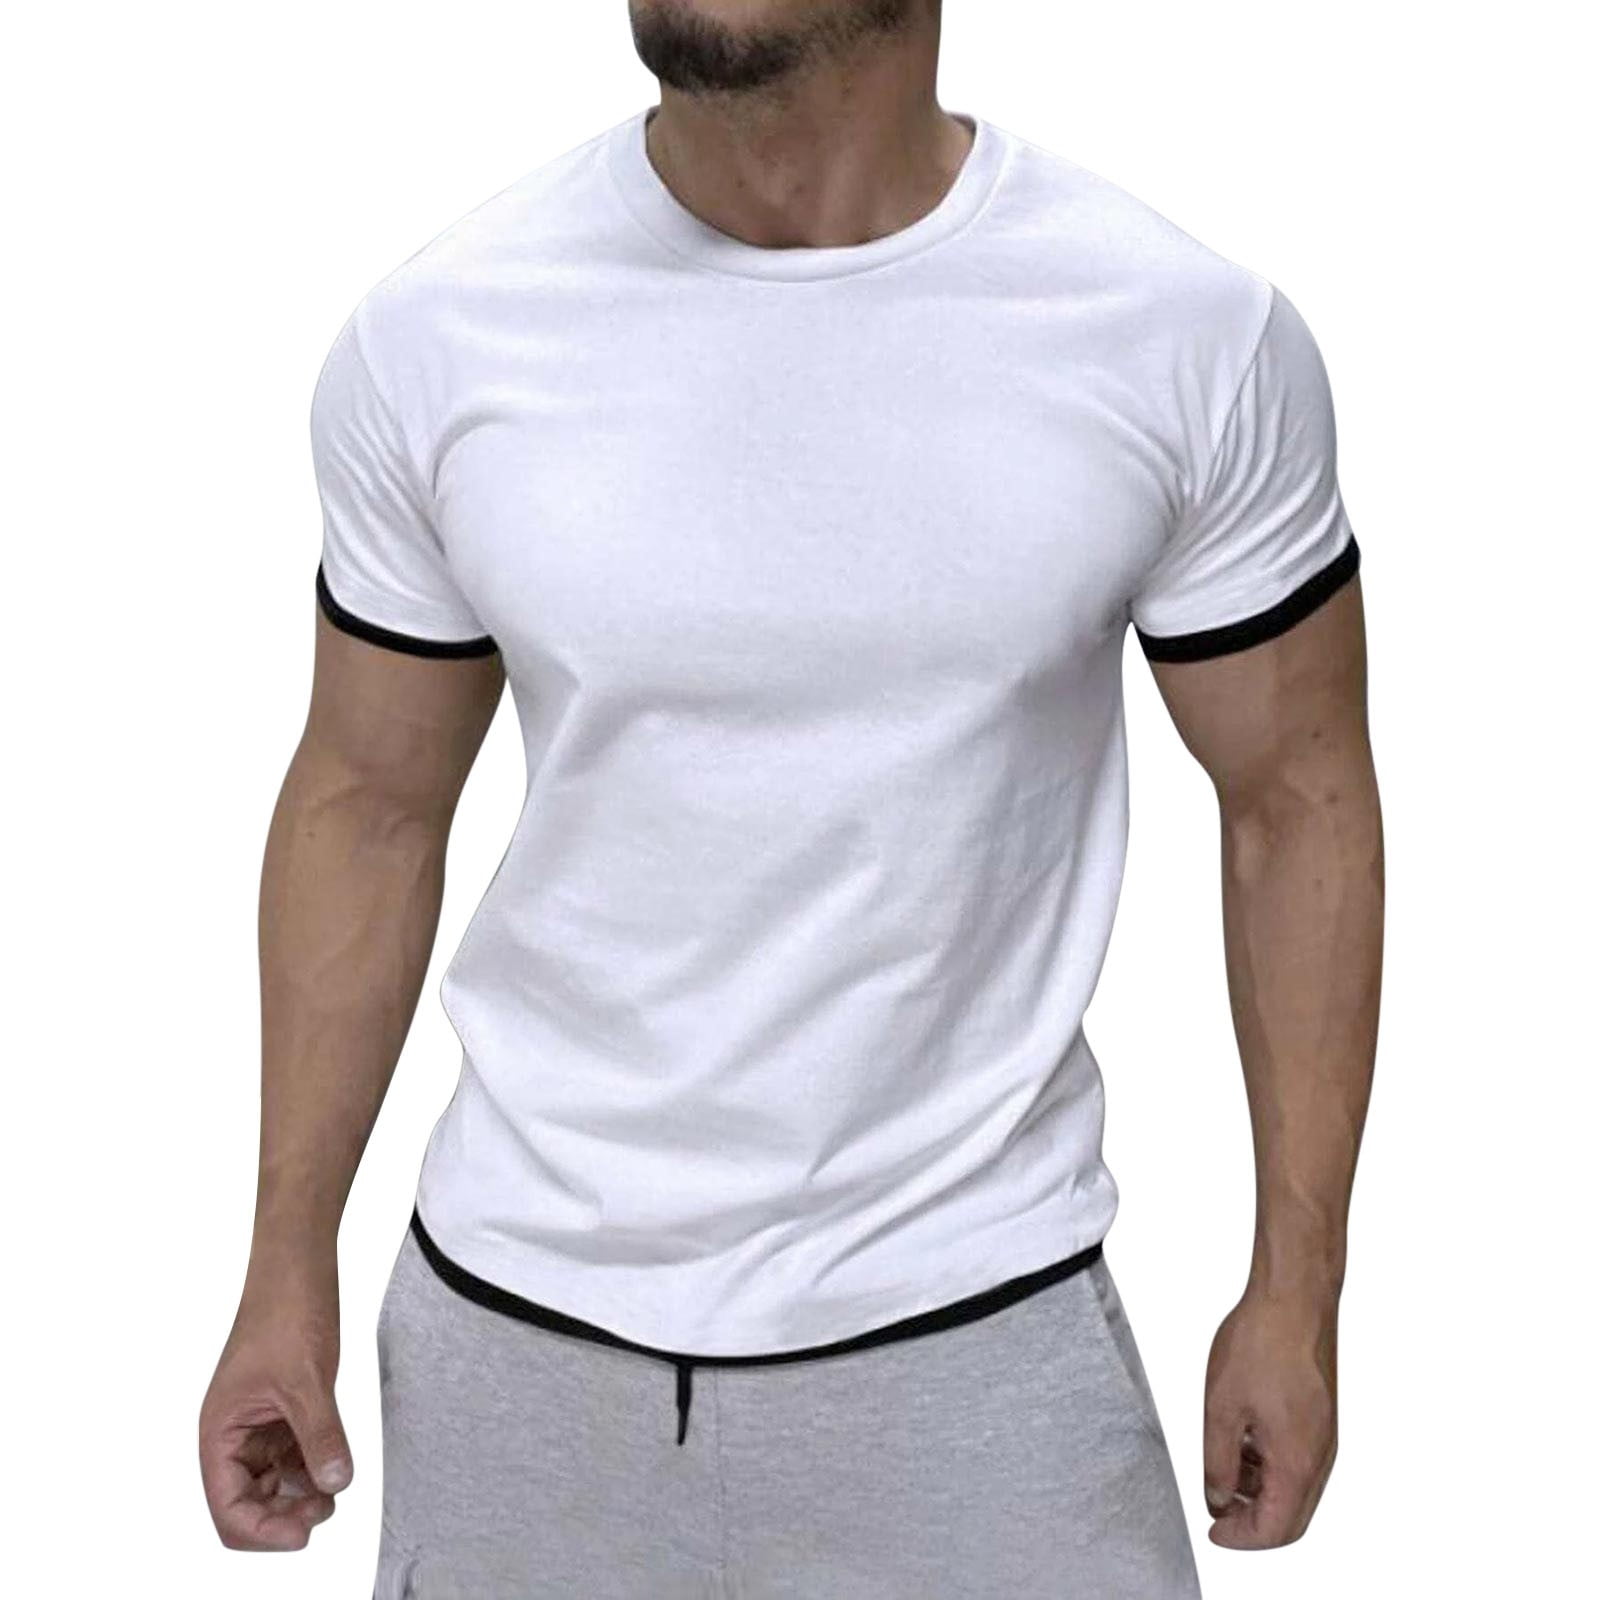 Funny T Shirts For Men Comfortable Breathable Round Neck T -Shirt White XL - Walmart.com